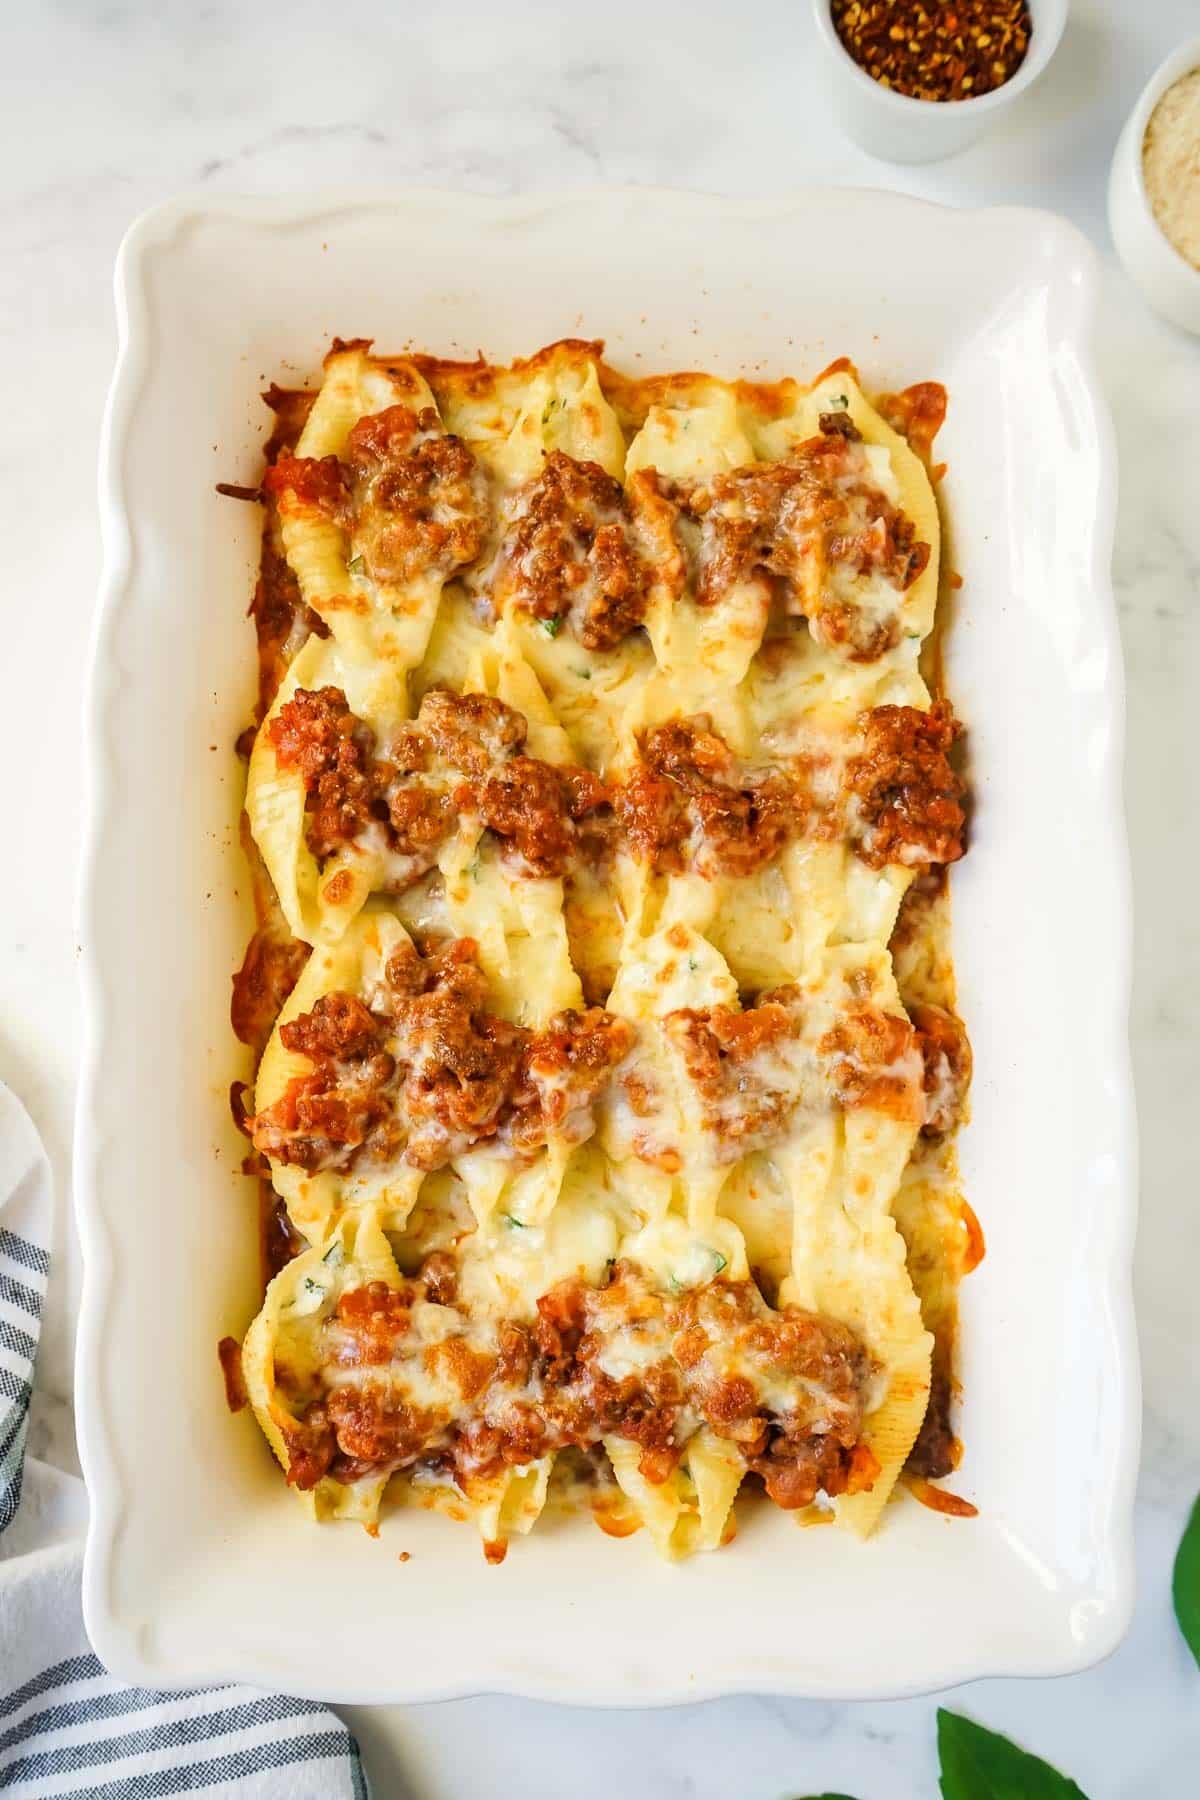 Cheesy stuffed shells with beef right out of the oven in a white casserole dish.